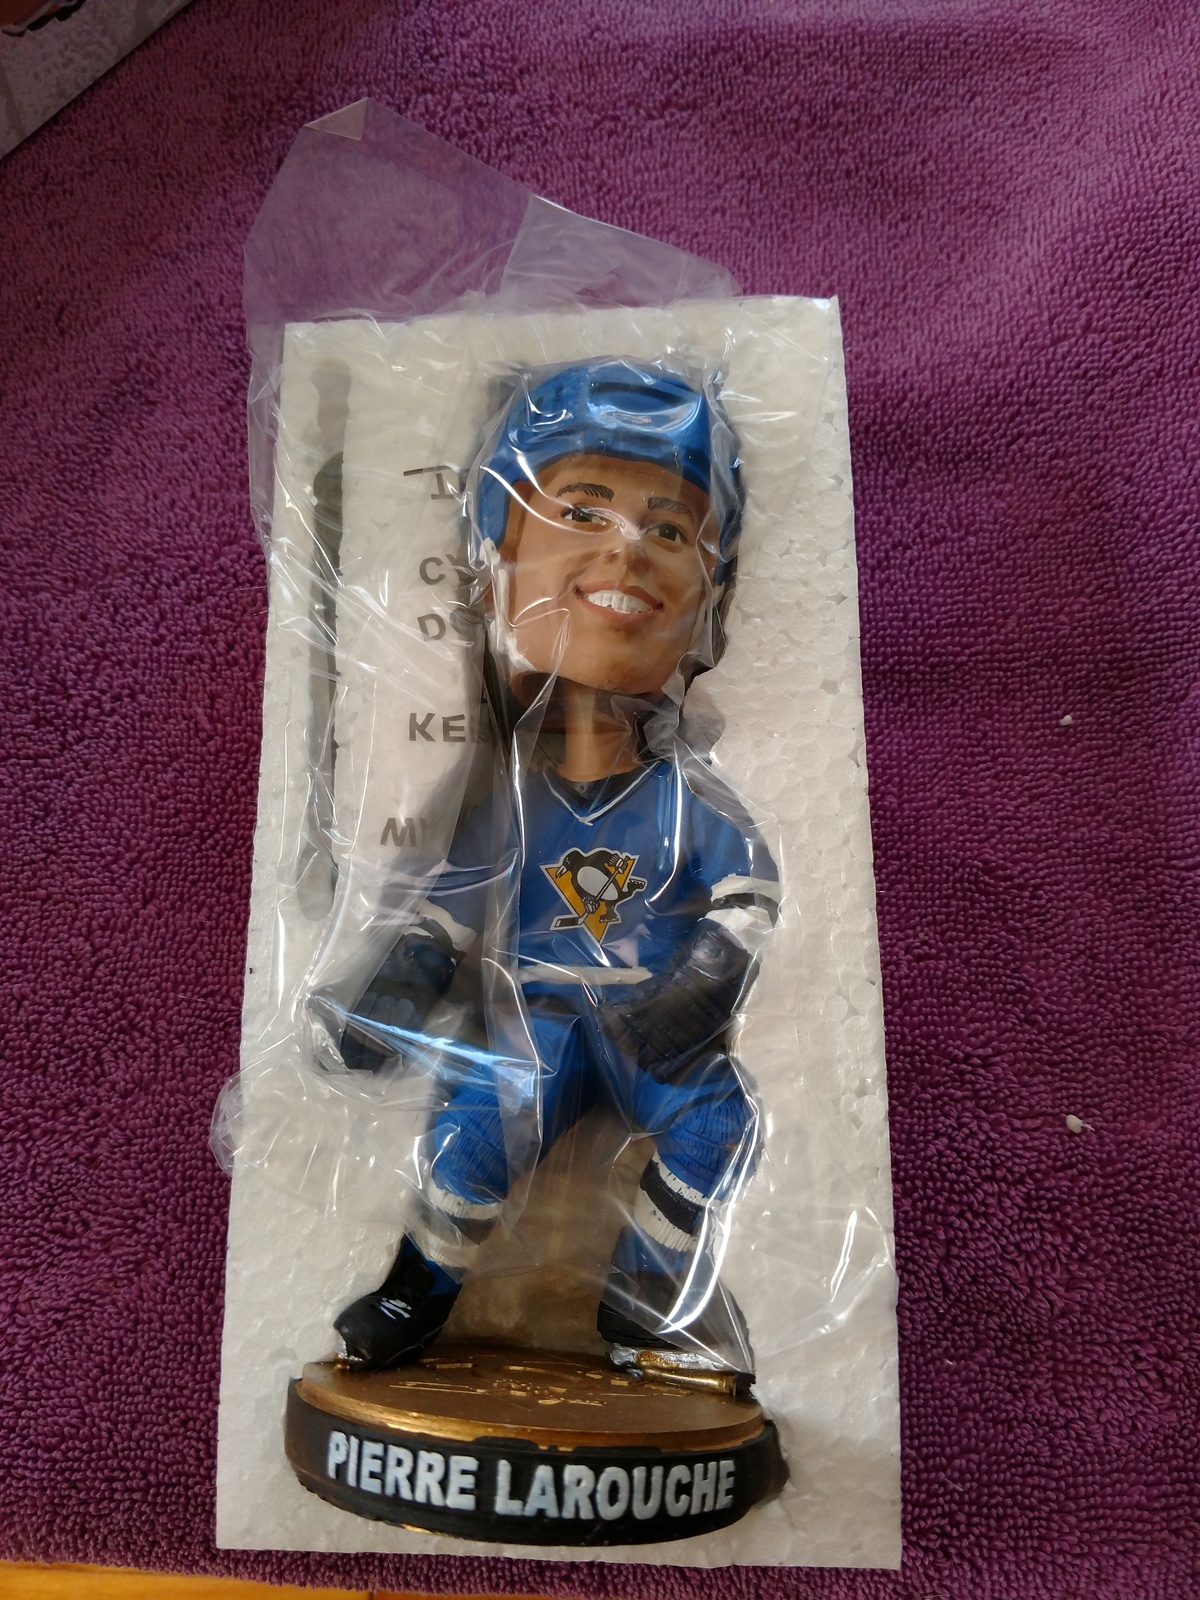 Primary image for Pierre Larouche 50th Anniversary Series Pittsburgh Penguins Bobblehead